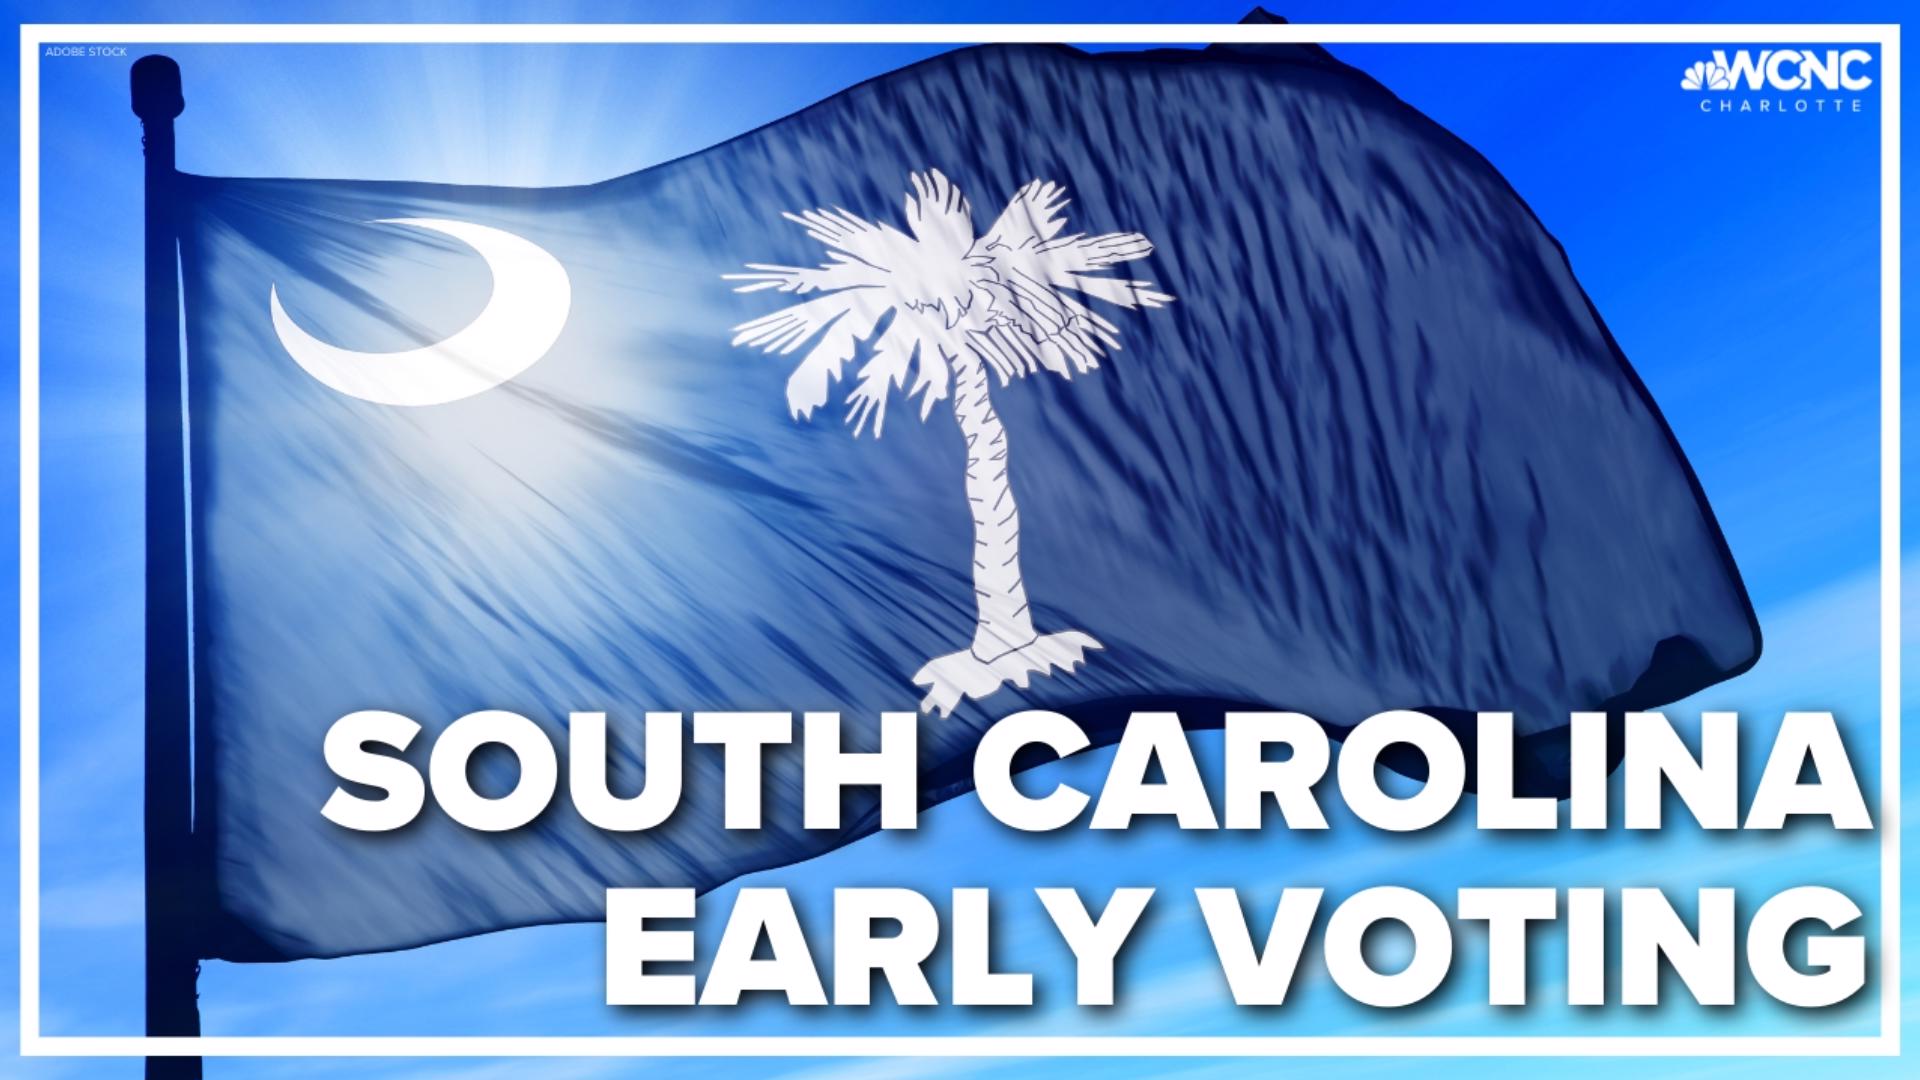 Early voting is underway for the first time ever in South Carolina.